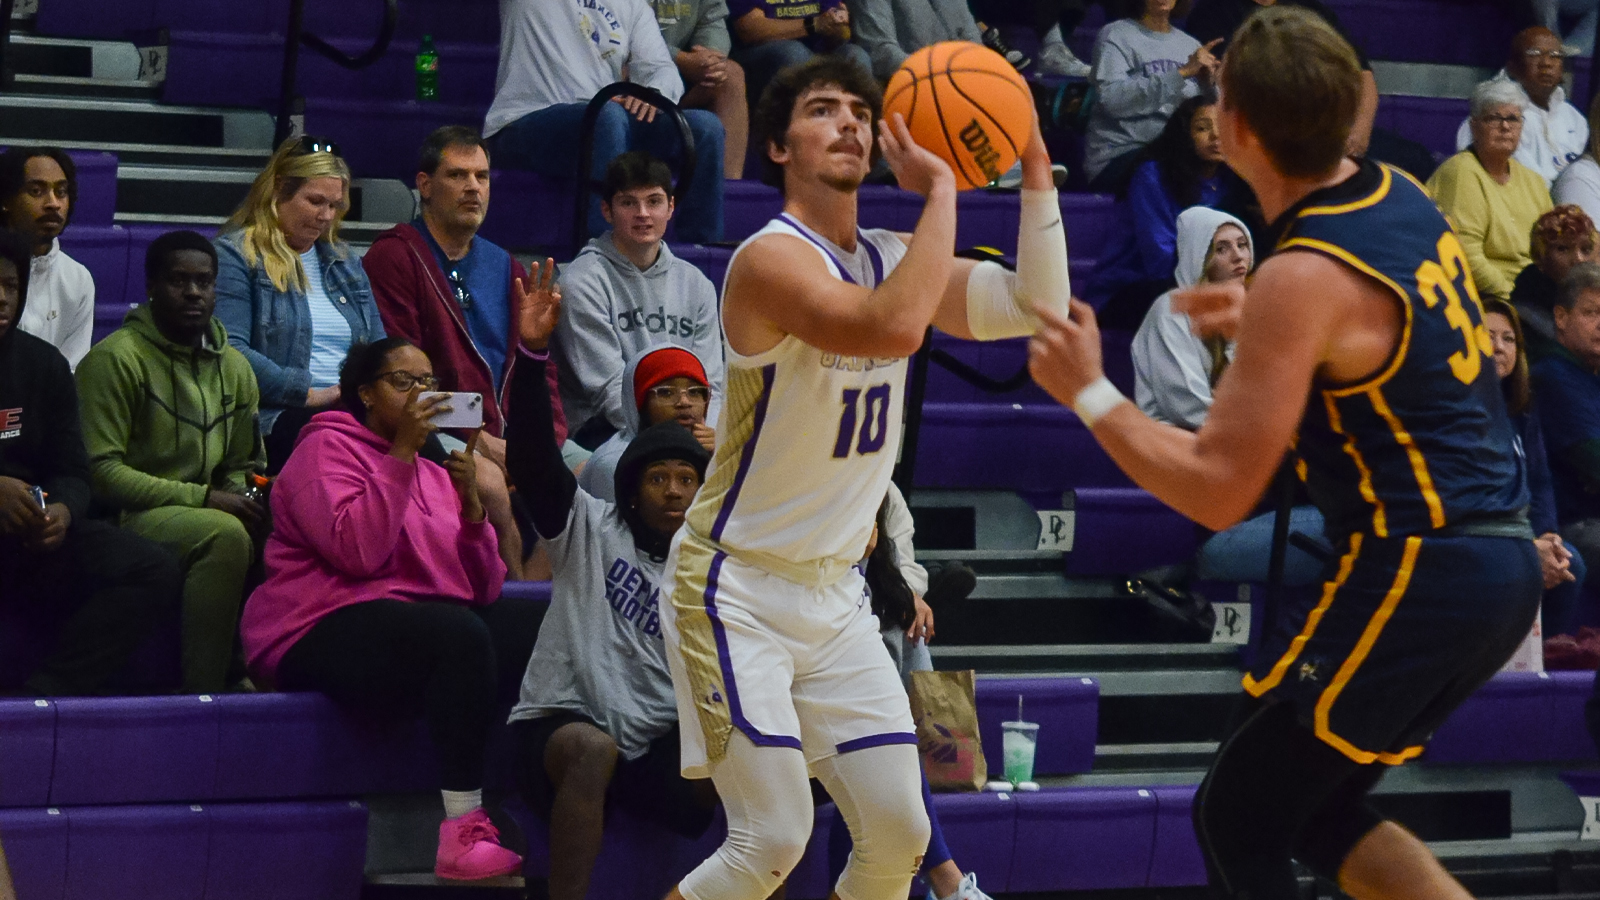 Gehlhausen leads second half surge but Alma holds off Jackets, 84-75